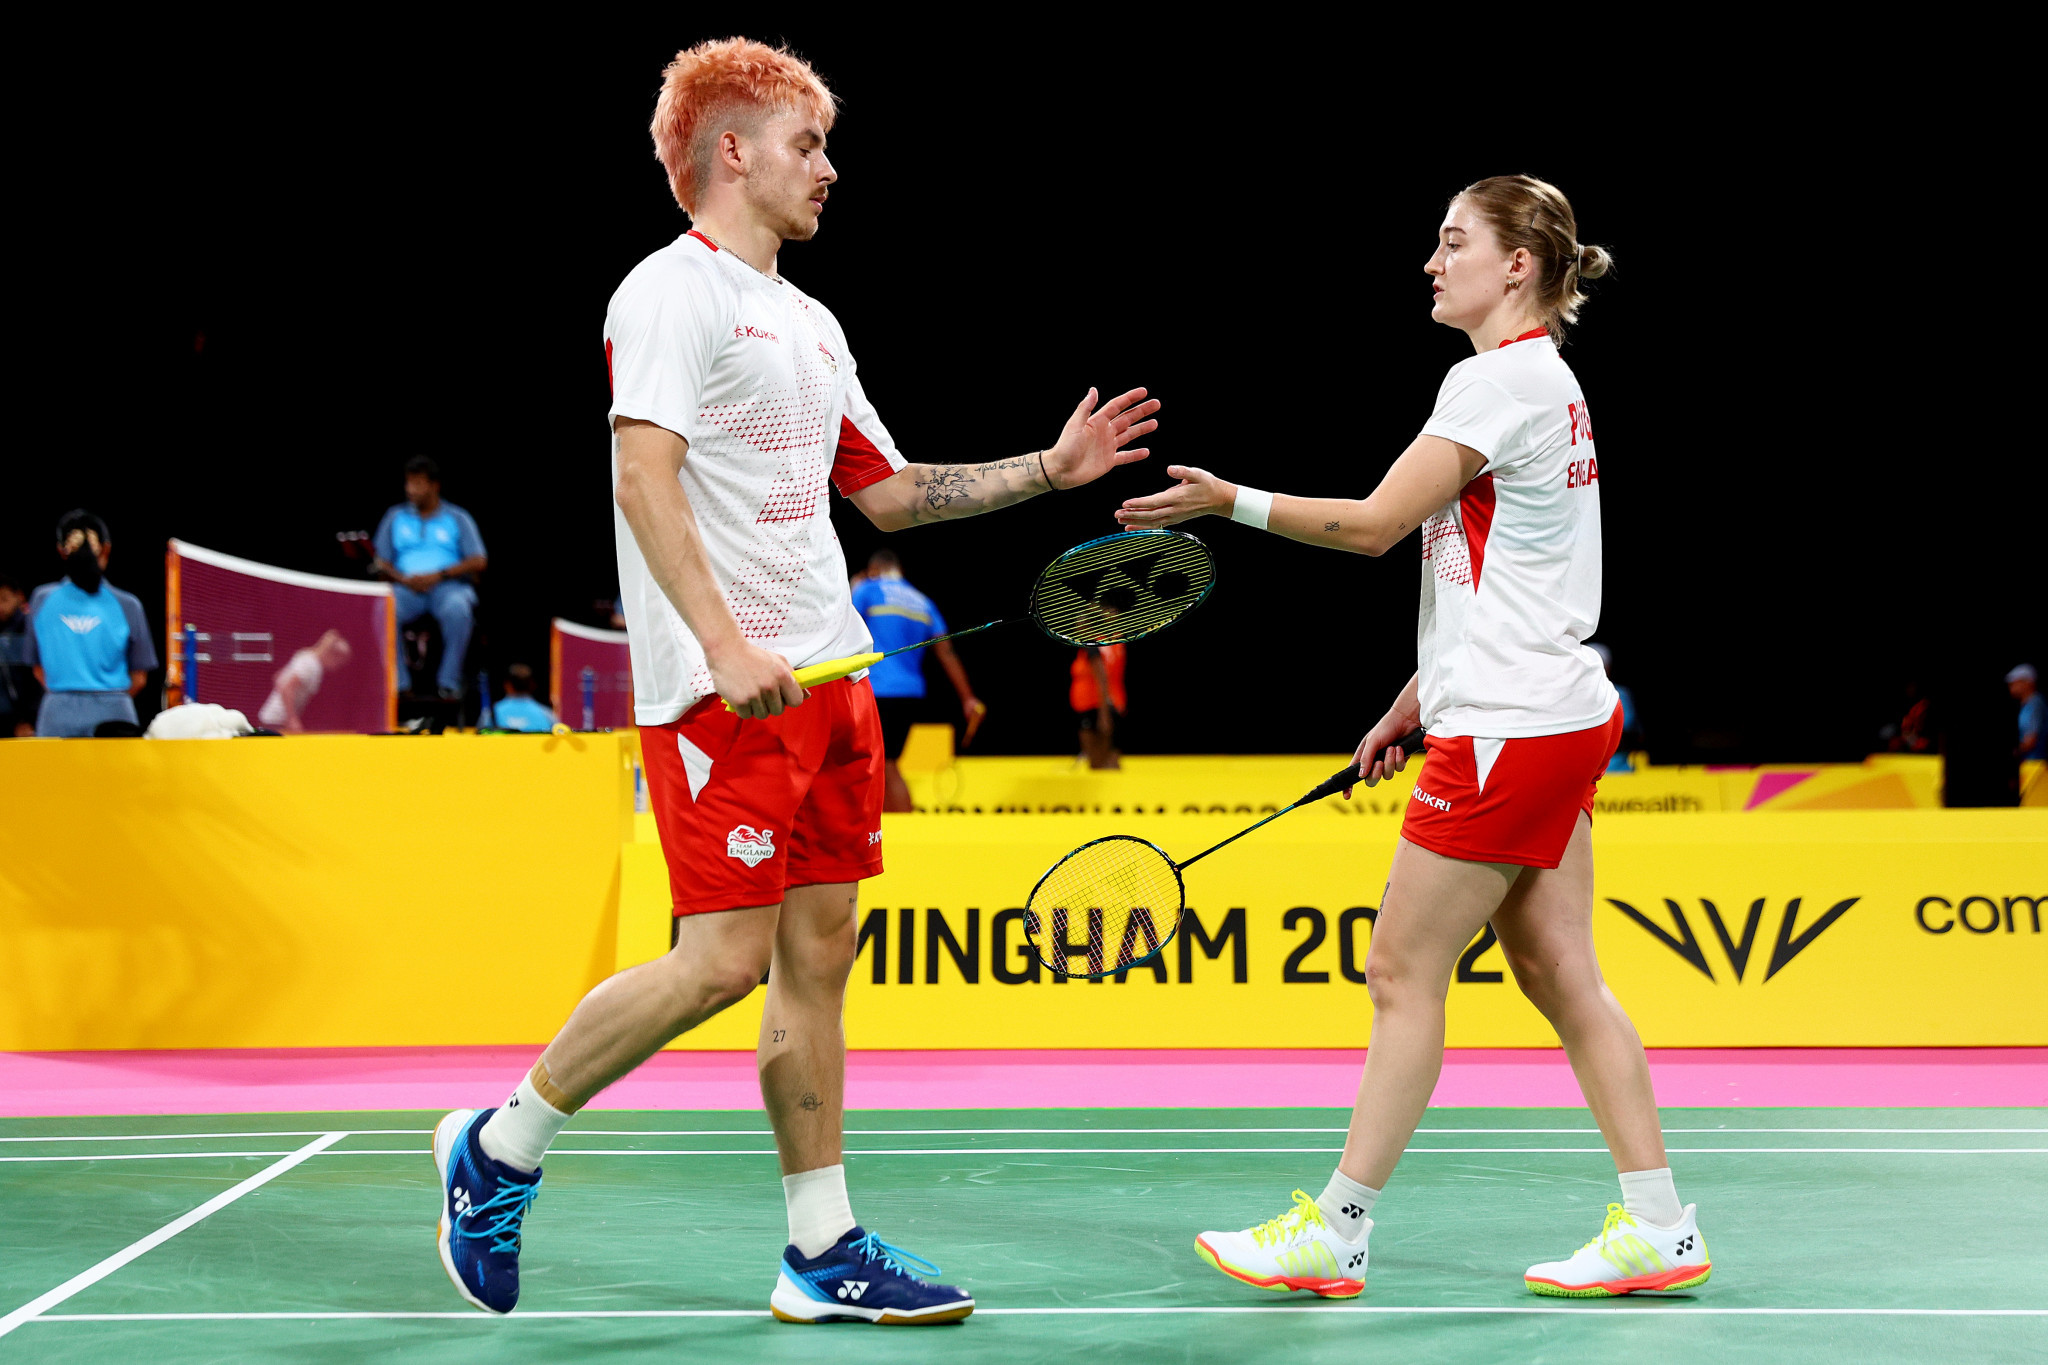 Callum Hemming, left, and Jessica Pugh advanced in the mixed doubles tournament after a feisty second round affair ©Getty Images